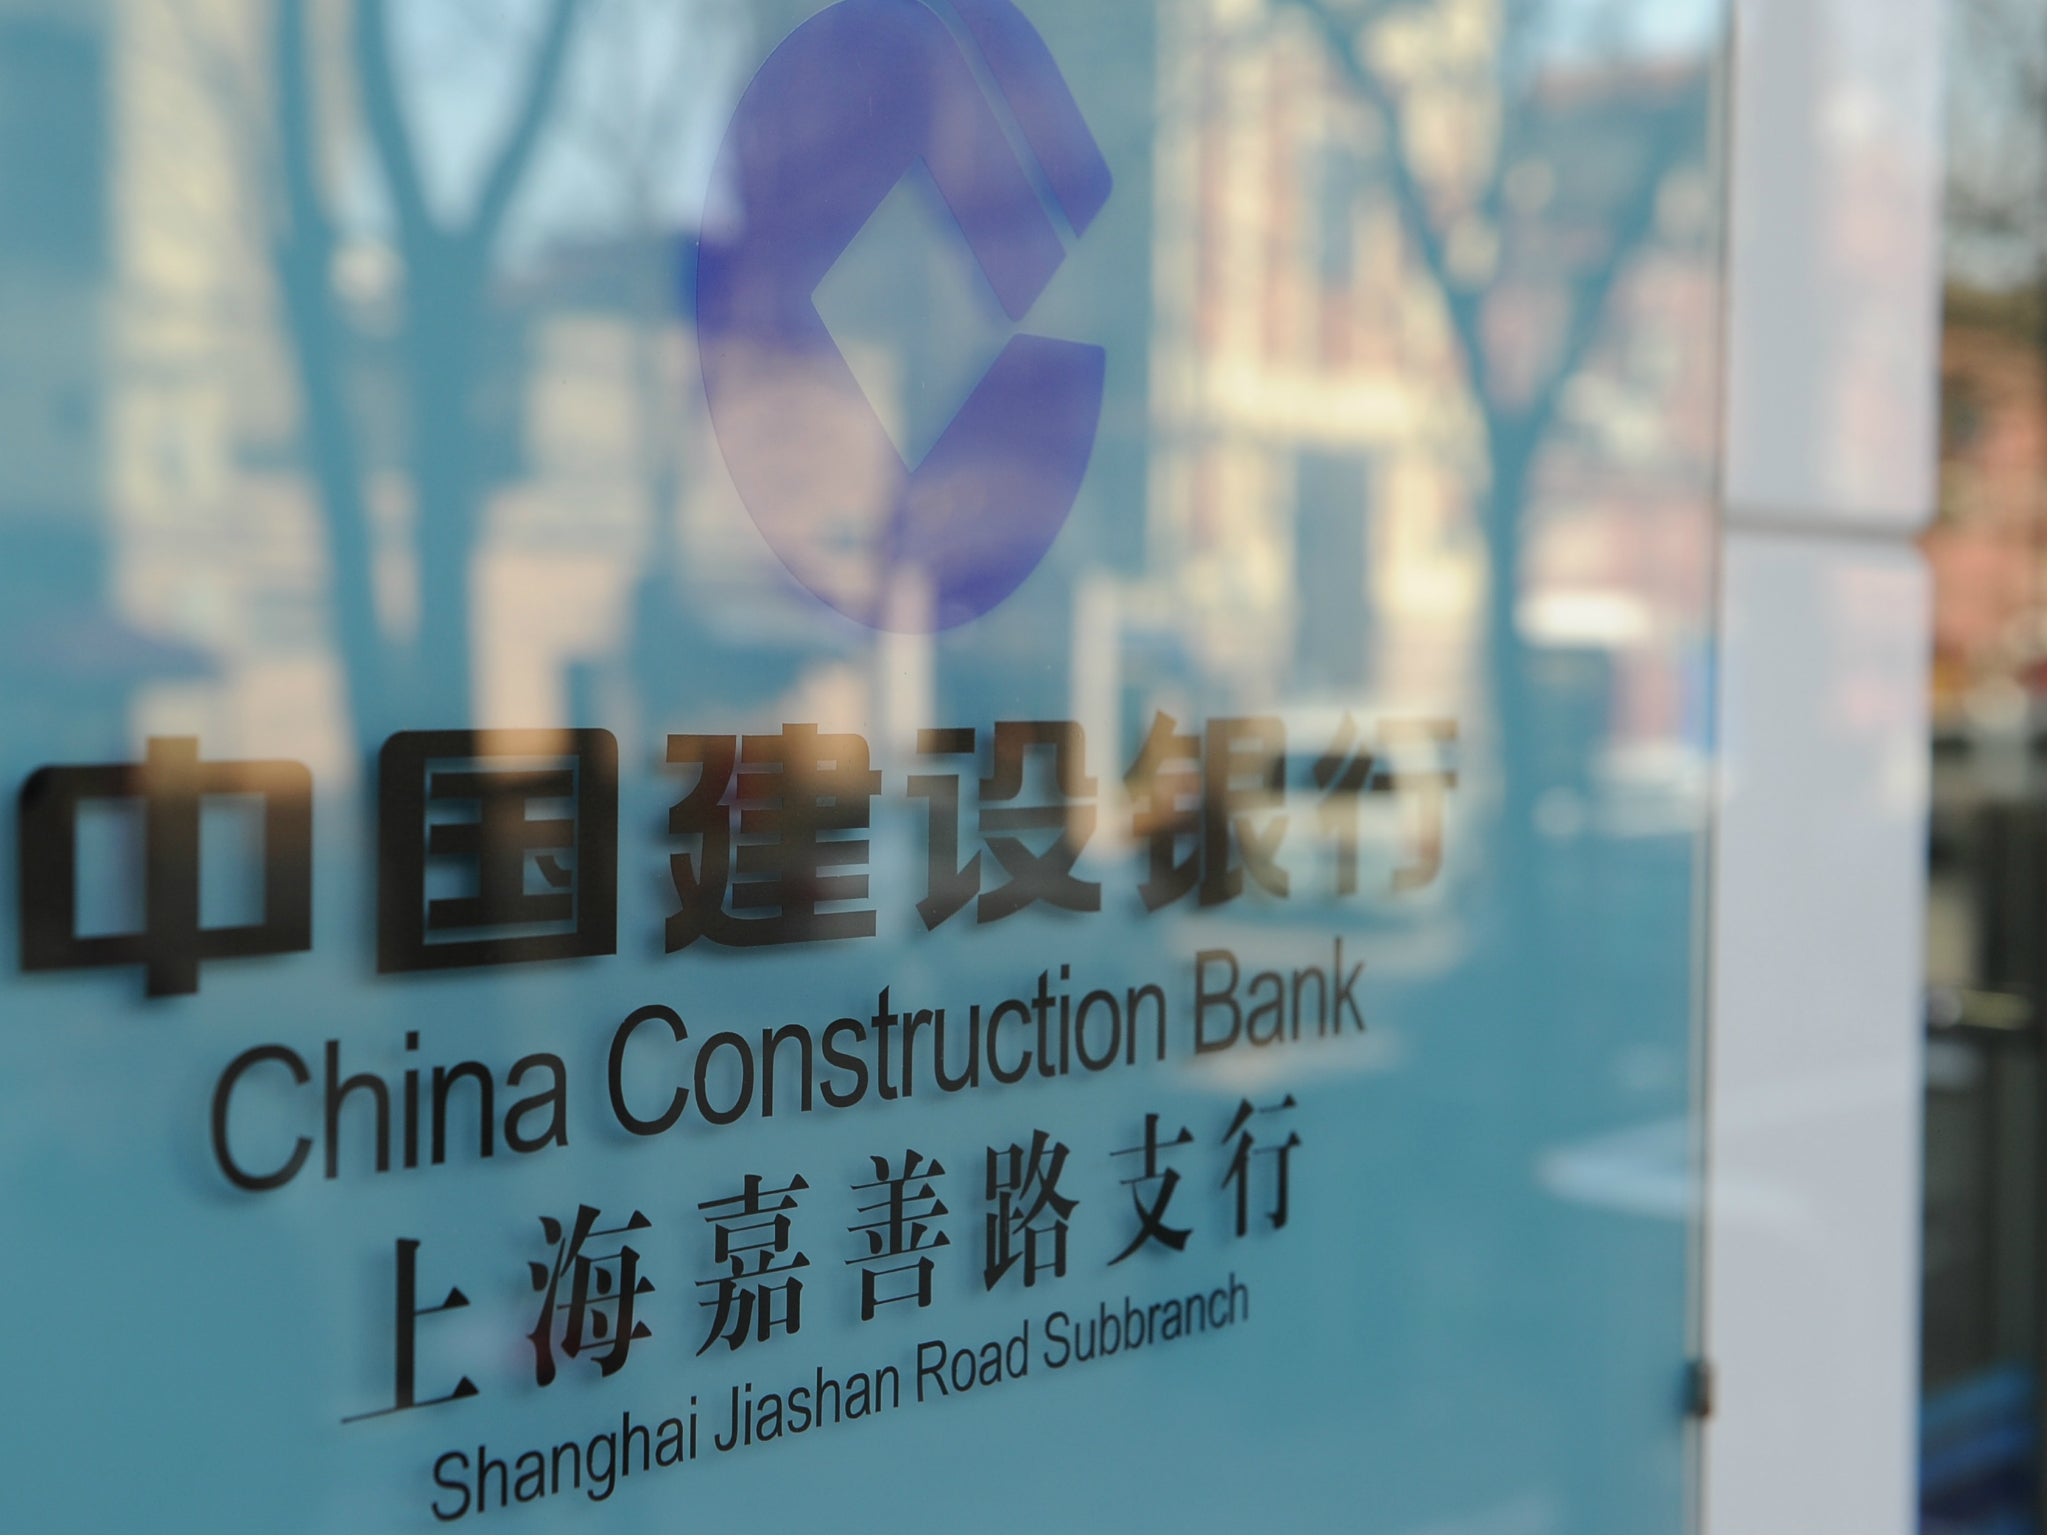 Employees of China Construction Bank have offered wealthy clients a chance to pay $150,000 to dine with Donald Trump in Texas